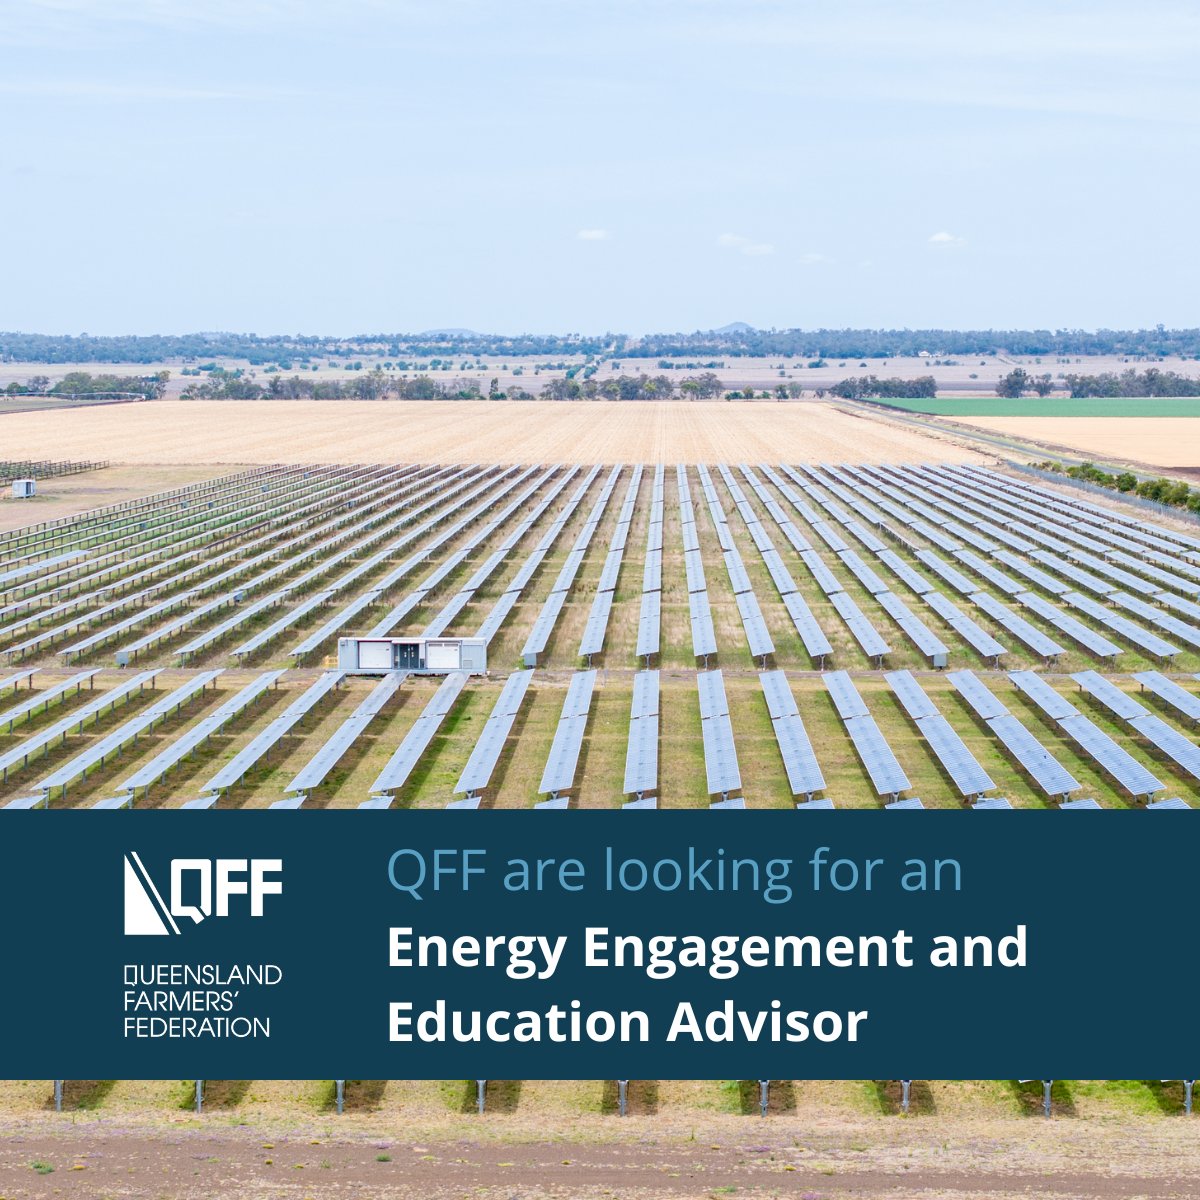 💡QFF are hiring for an Energy Engagement and Education Advisor. You'll be driving engagement in key policy discussions, community consultations, and projects related to the #RenewableEnergy transition within the #AgSector. Learn more and apply here 👉 bit.ly/3xBbAuP